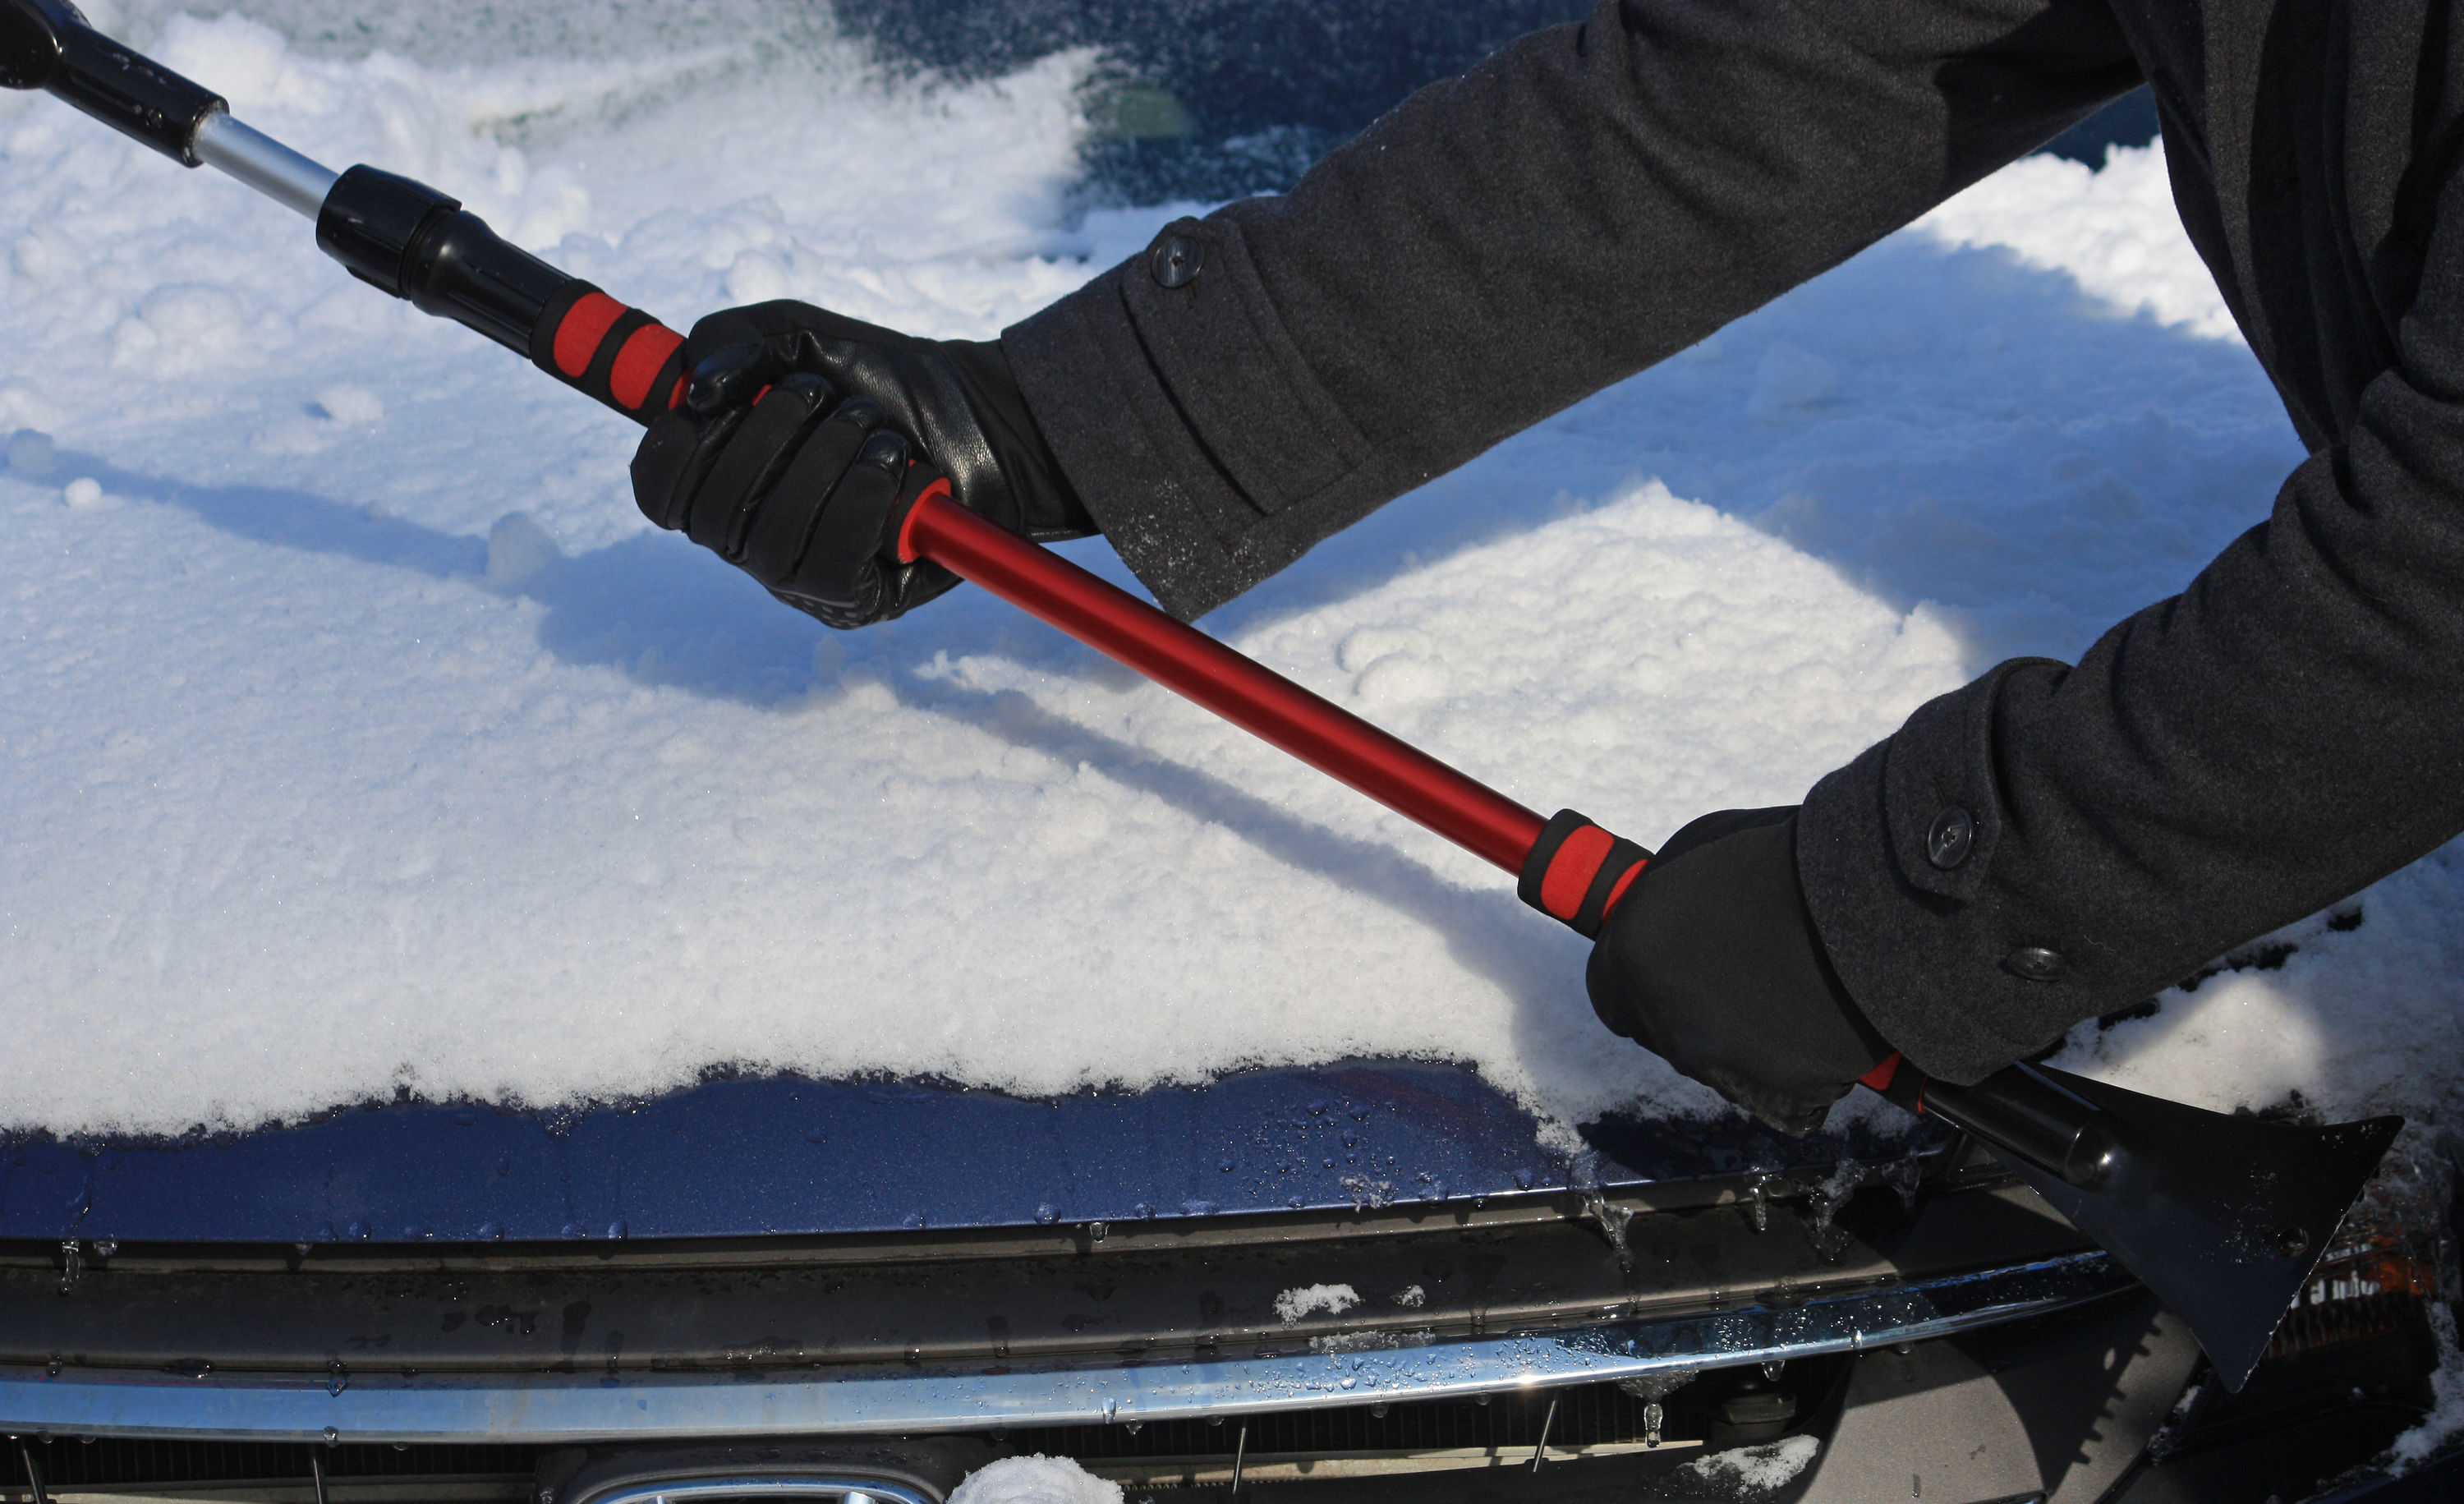 Snow Moover 58 Extendable Snow Brush with Squeegee & Ice Scraper | Foam Grip 